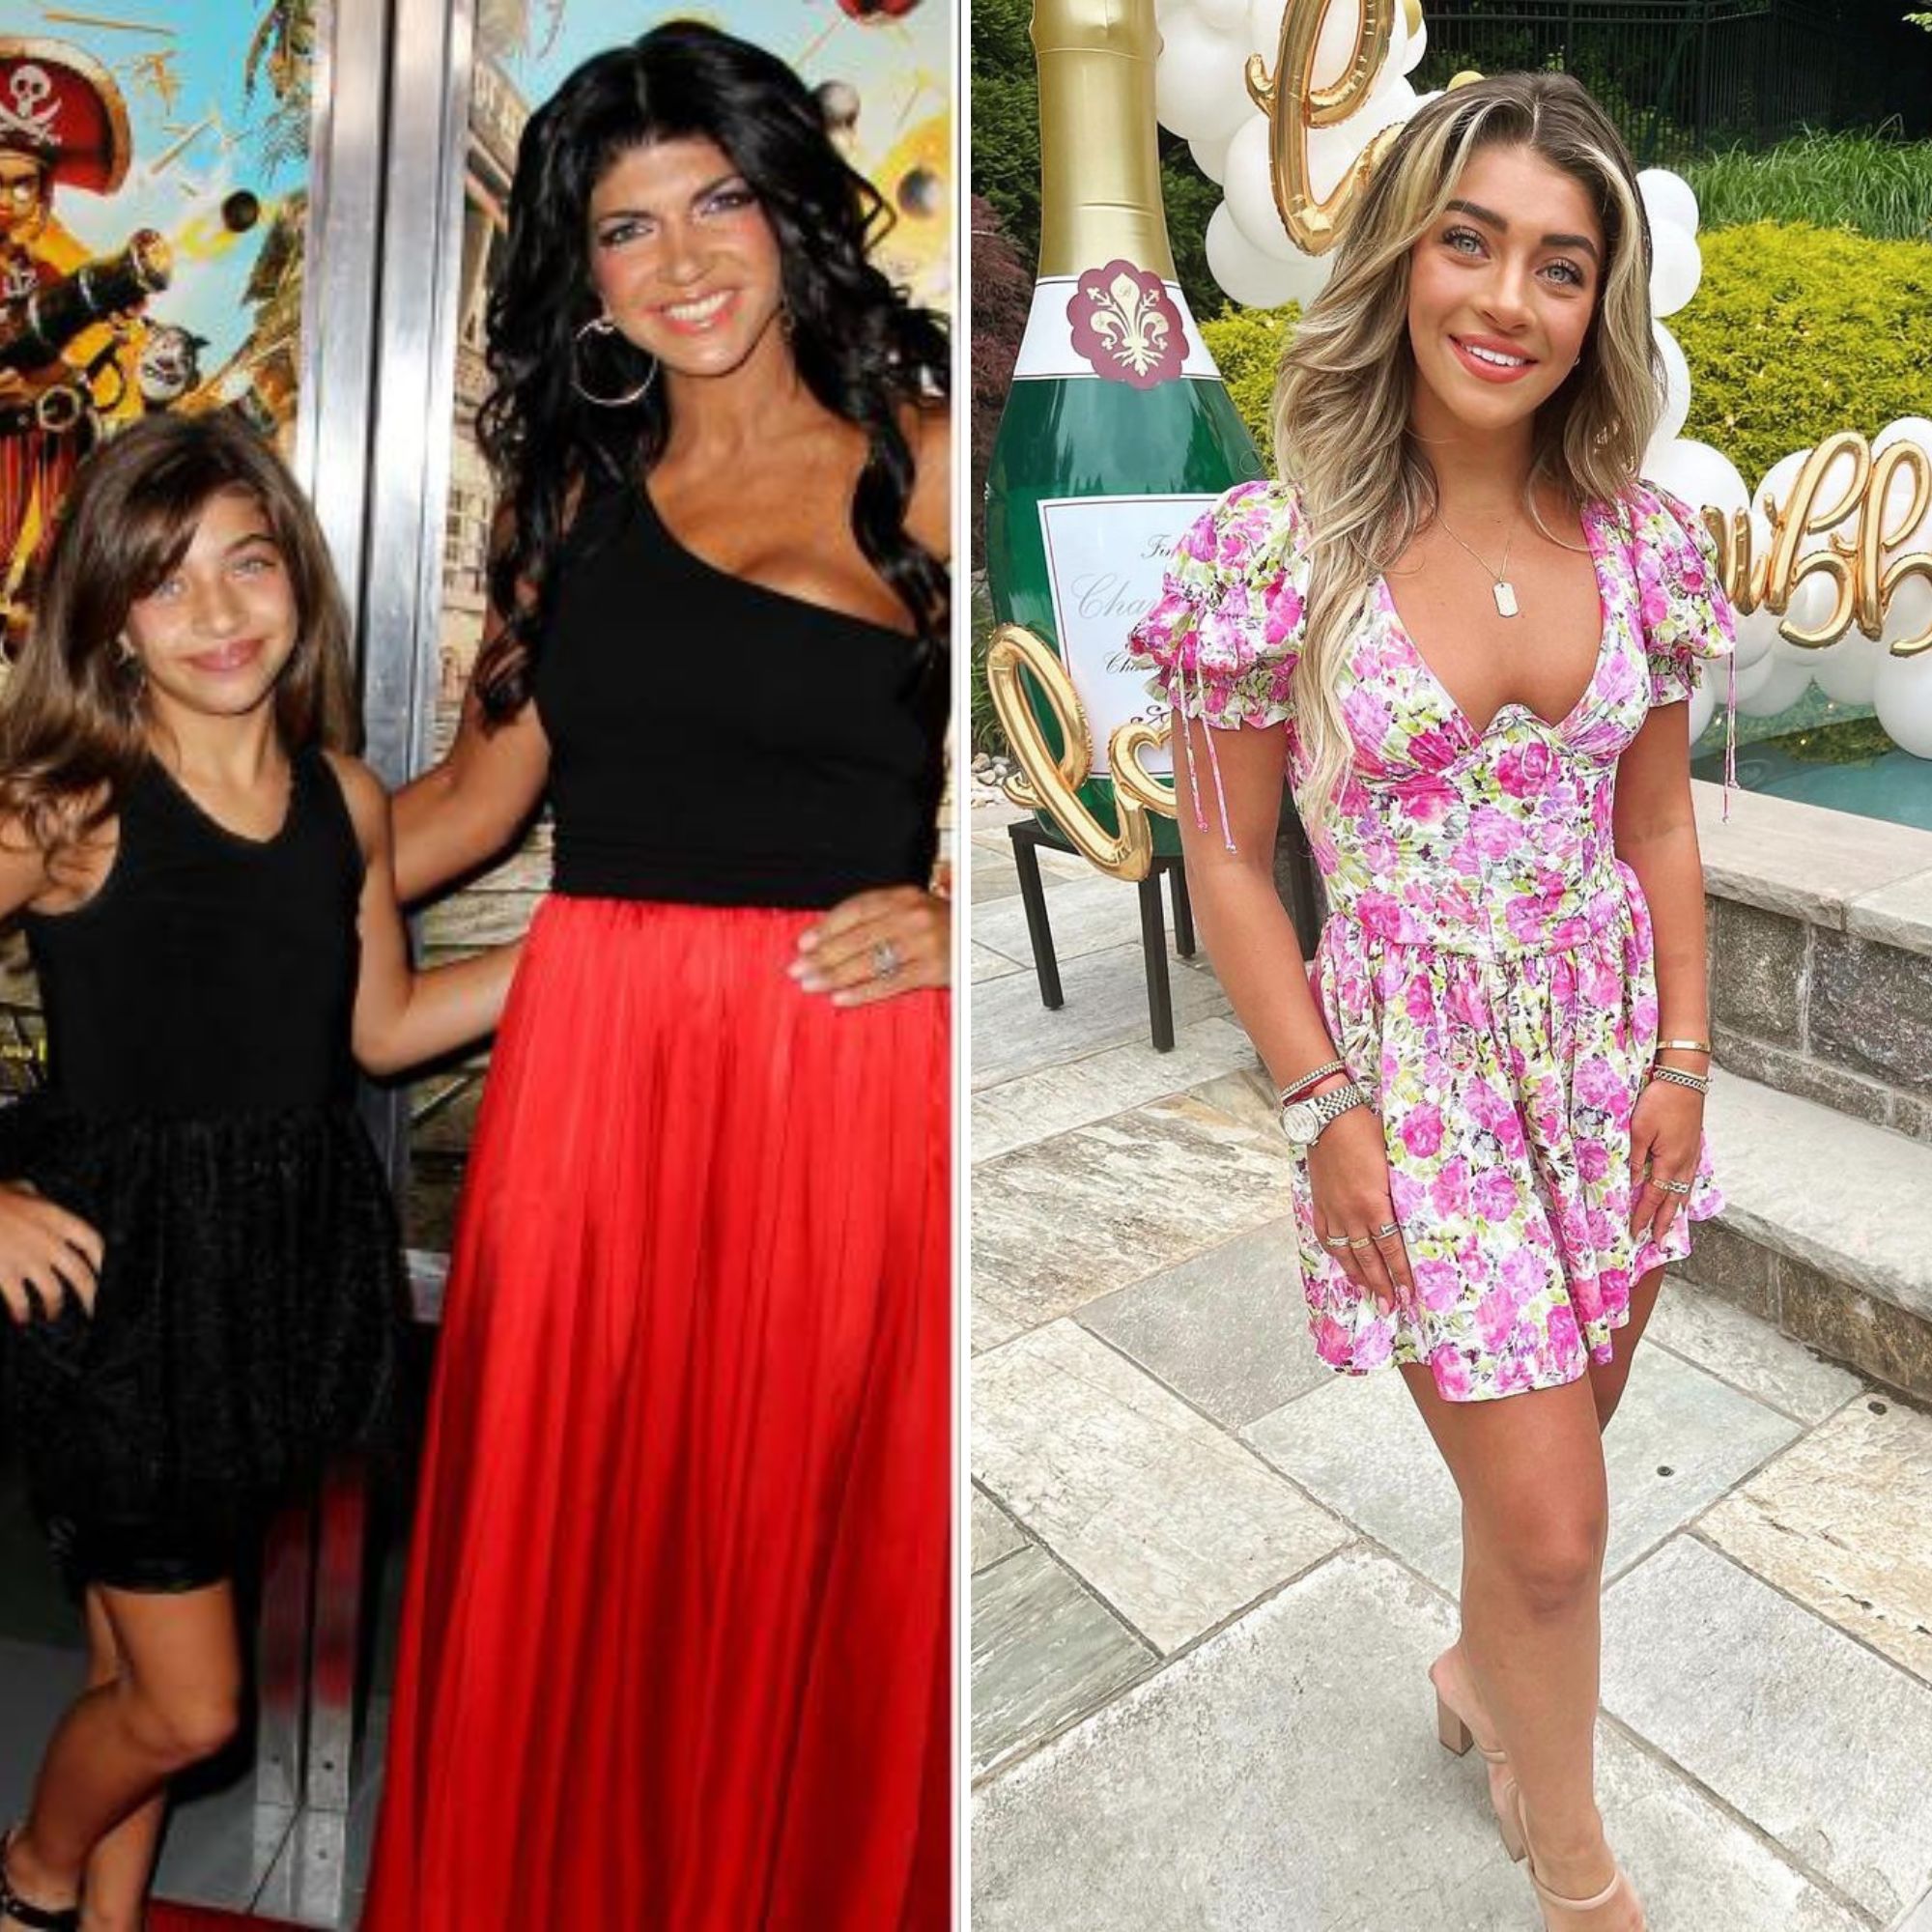 Gia Giudice Transformation Photos of the RHONJ Star picture pic